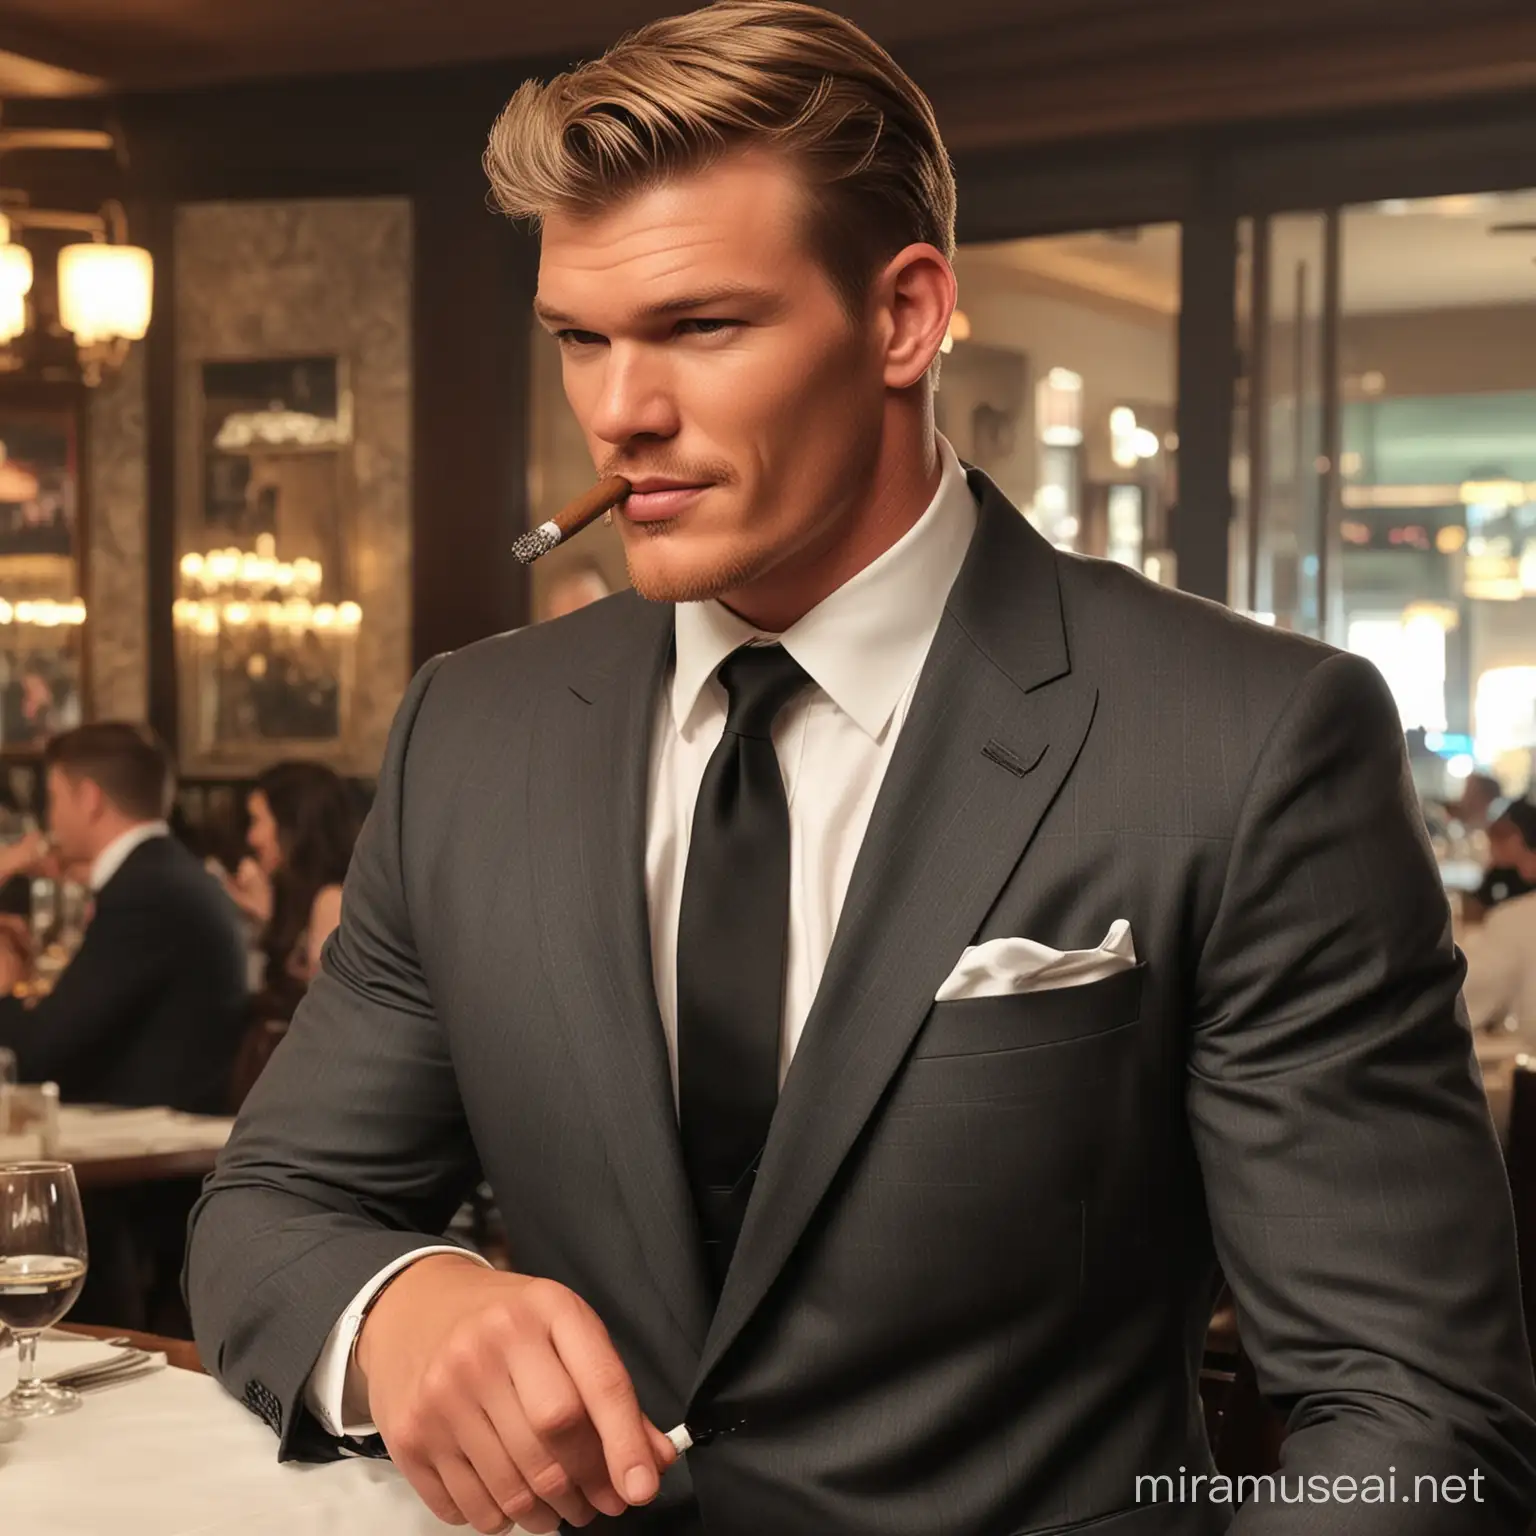 Alan Ritchson Dons 1950s Business Look Enjoying Cigar at Upscale Restaurant